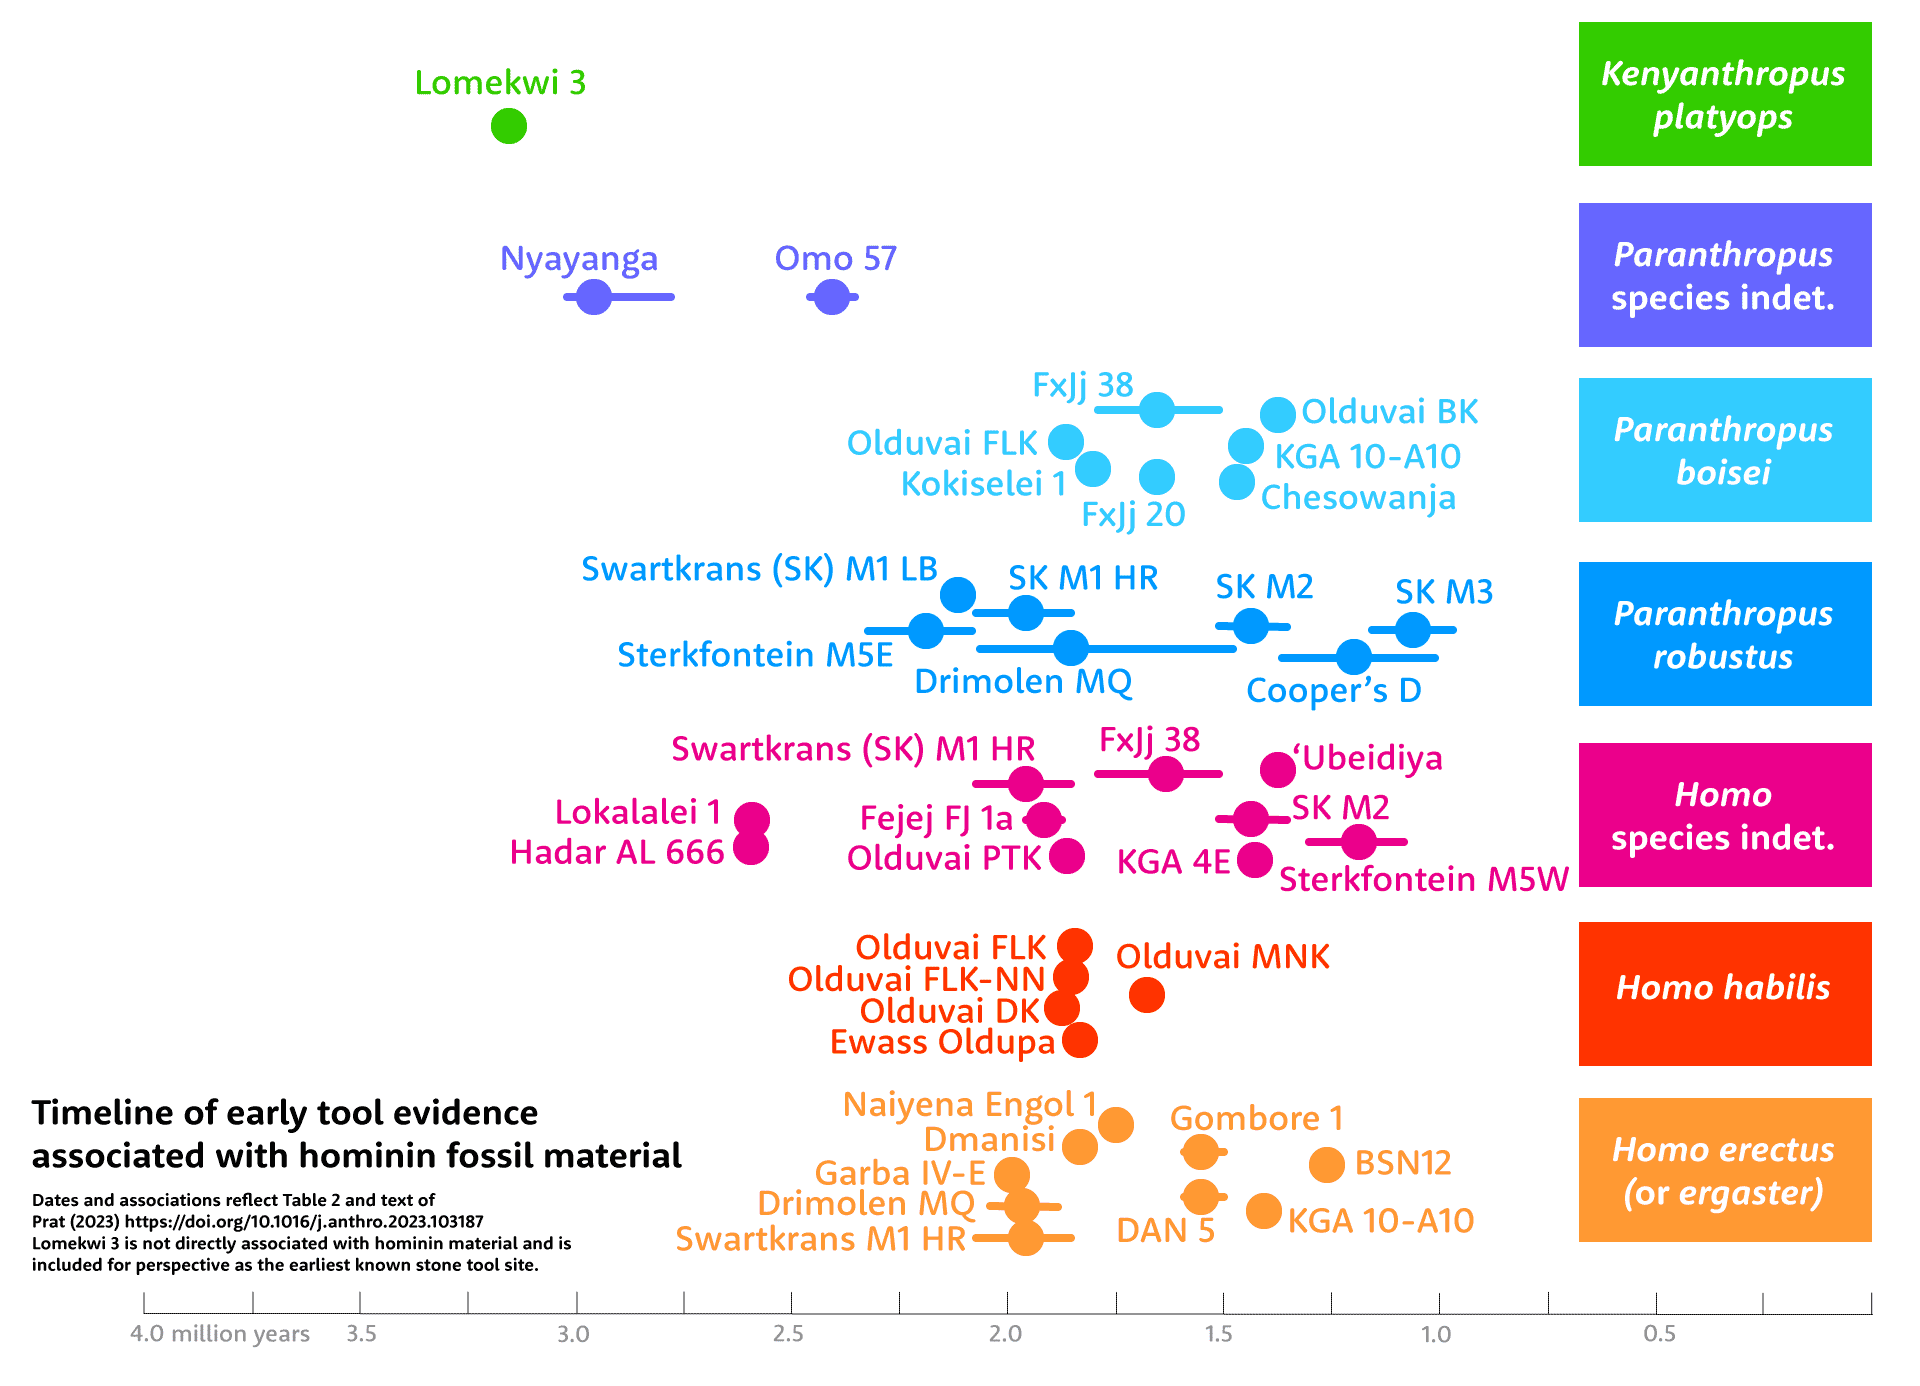 Timeline of early tool evidence associated with hominin fossil material. The image shows that Paranthropus and Homo species are both associated with stone and bone tools. 